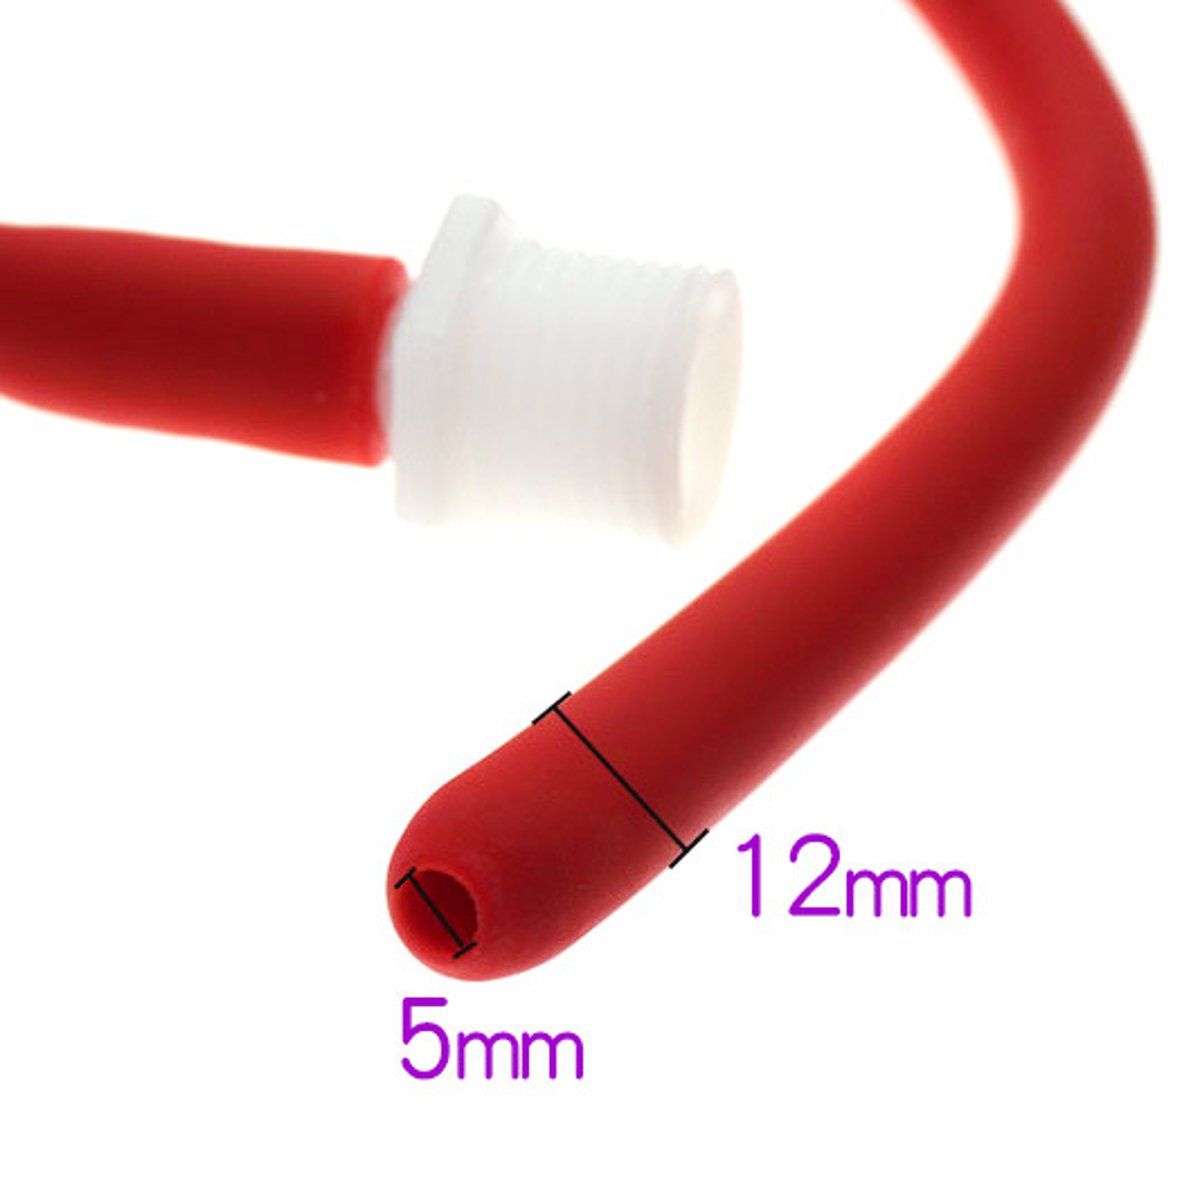 50100150cm-Long-Enema-Tube-Cleaner-Douche-Soft-Silicone-Latex-Nozzle-Cleaning-Silicone-Tube-1336542